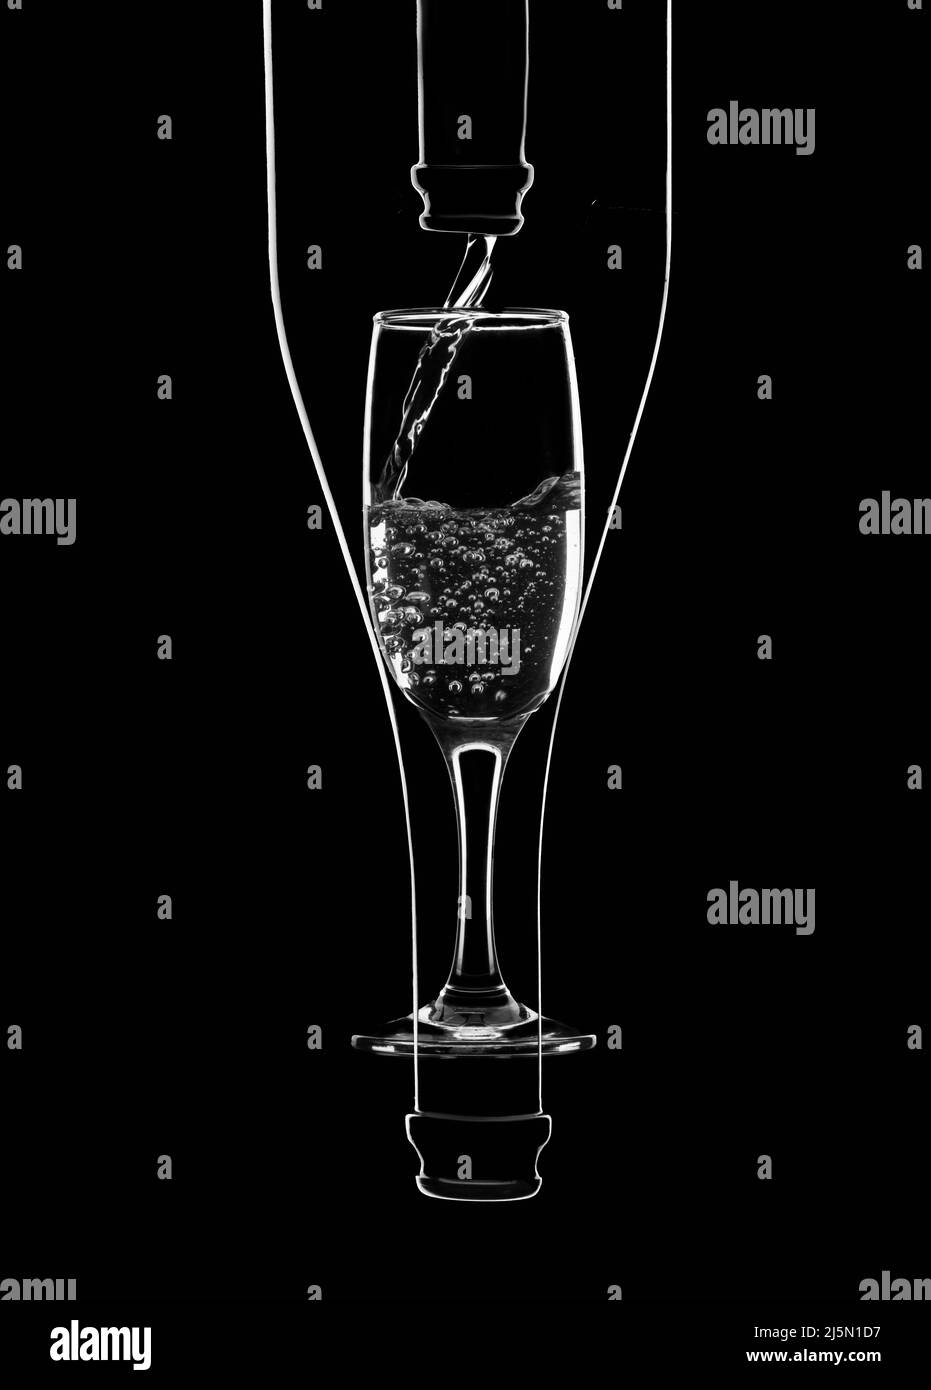 Champagne bottle and glass silhouette, isolated black background. Stock Photo